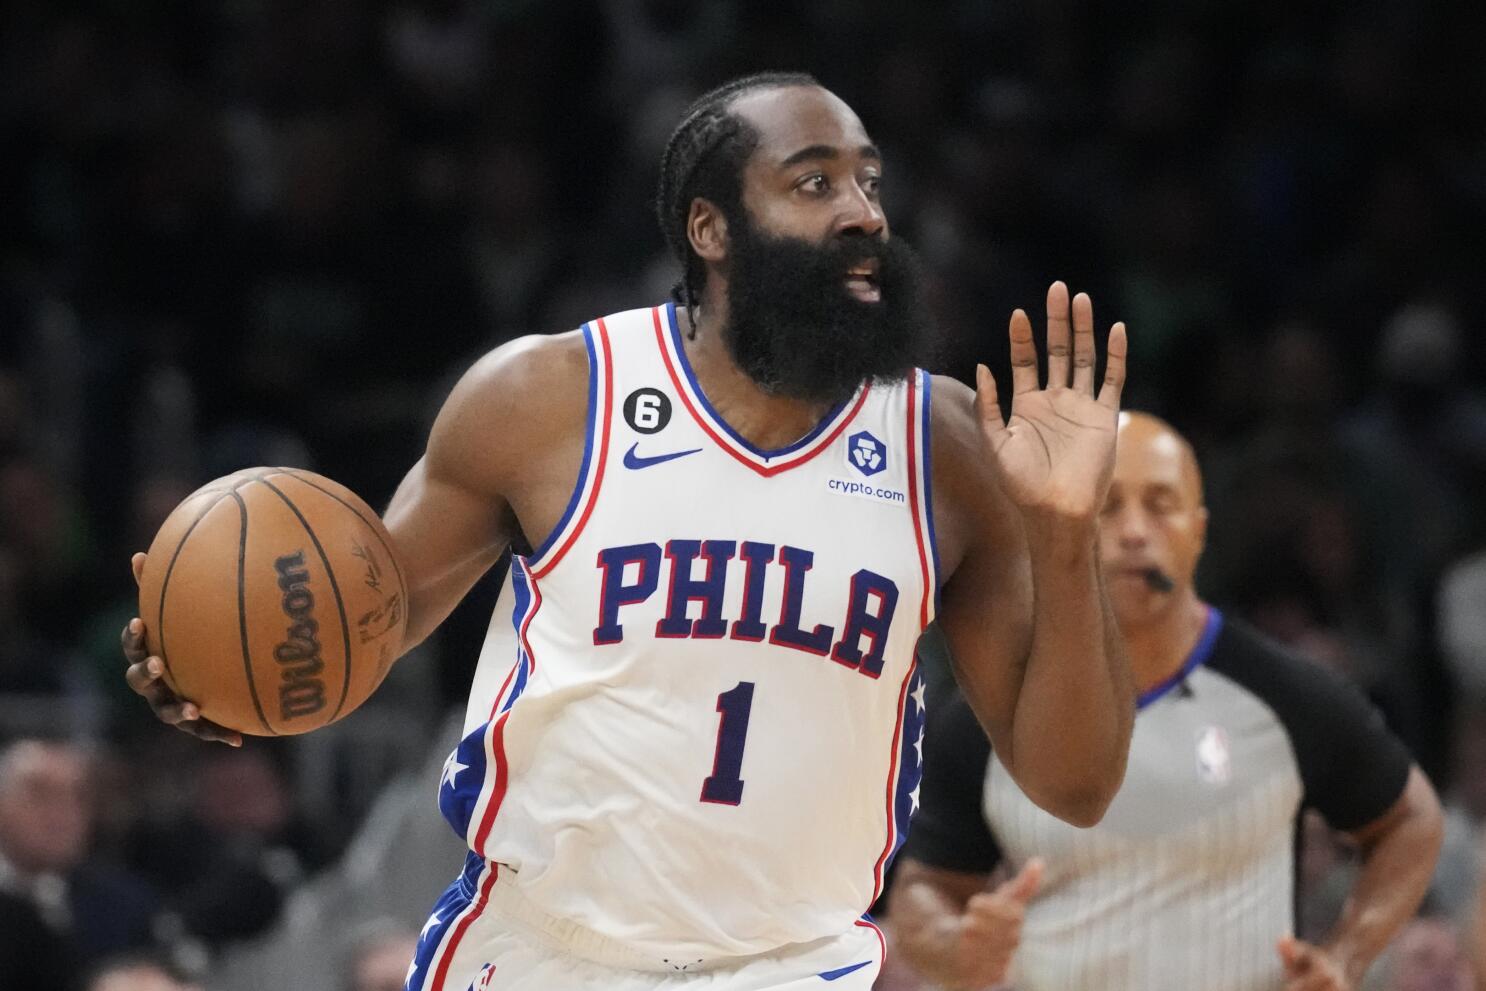 Could the James Harden trade mark the end of the NBA's Big Three